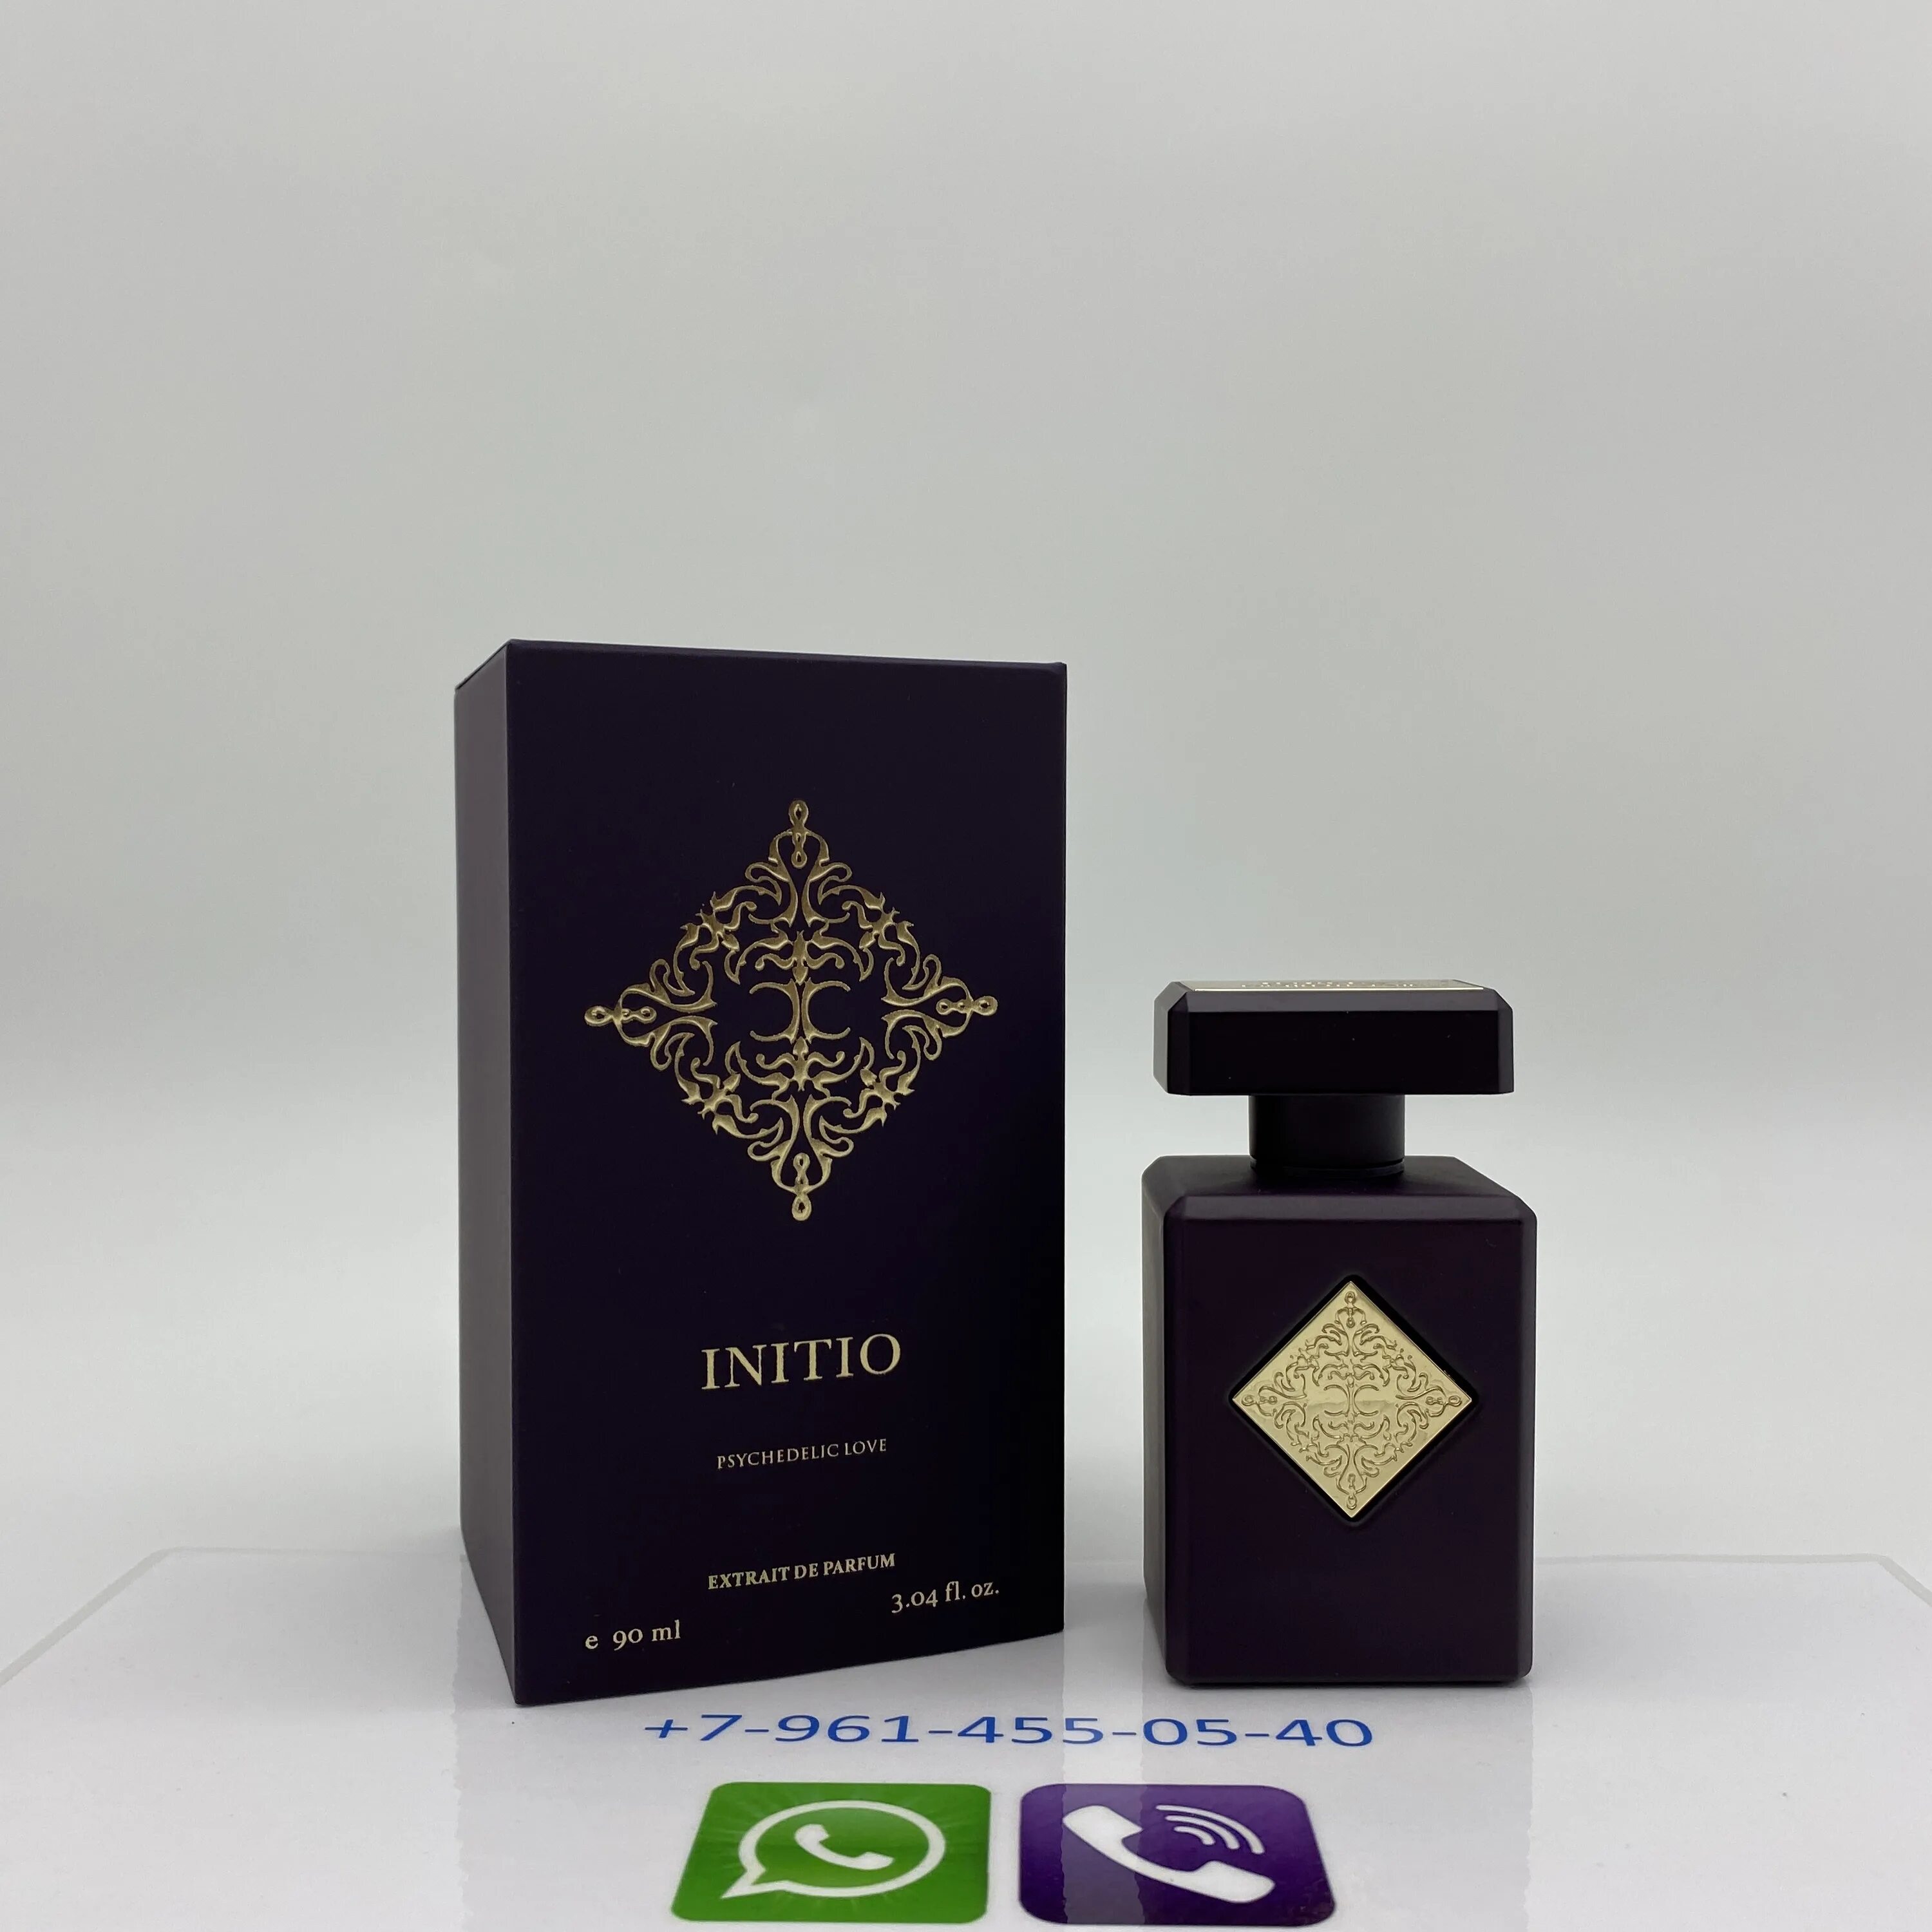 Initio prives psychedelic love. Initio Parfums prives Psychedelic Love, 90 ml. Initio Psychedelic Love 90ml. Initio "prives Psychedelic Love" 20 ml. Духи Initio Psychedelic Love.